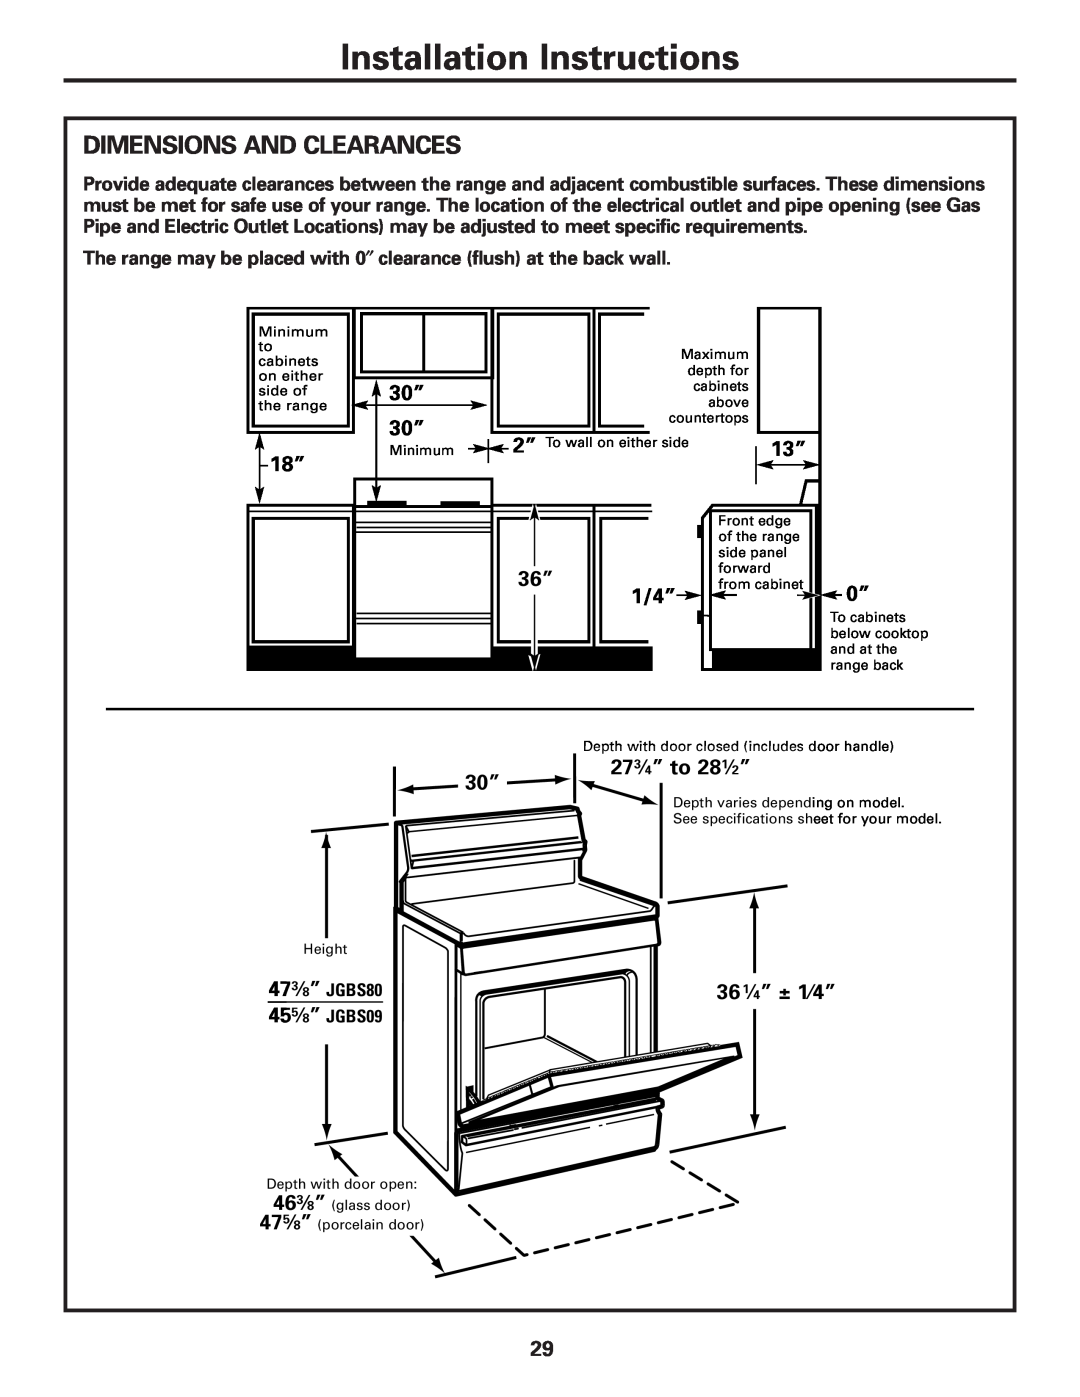 GE JGBS80 installation instructions Installation Instructions, Dimensions And Clearances 